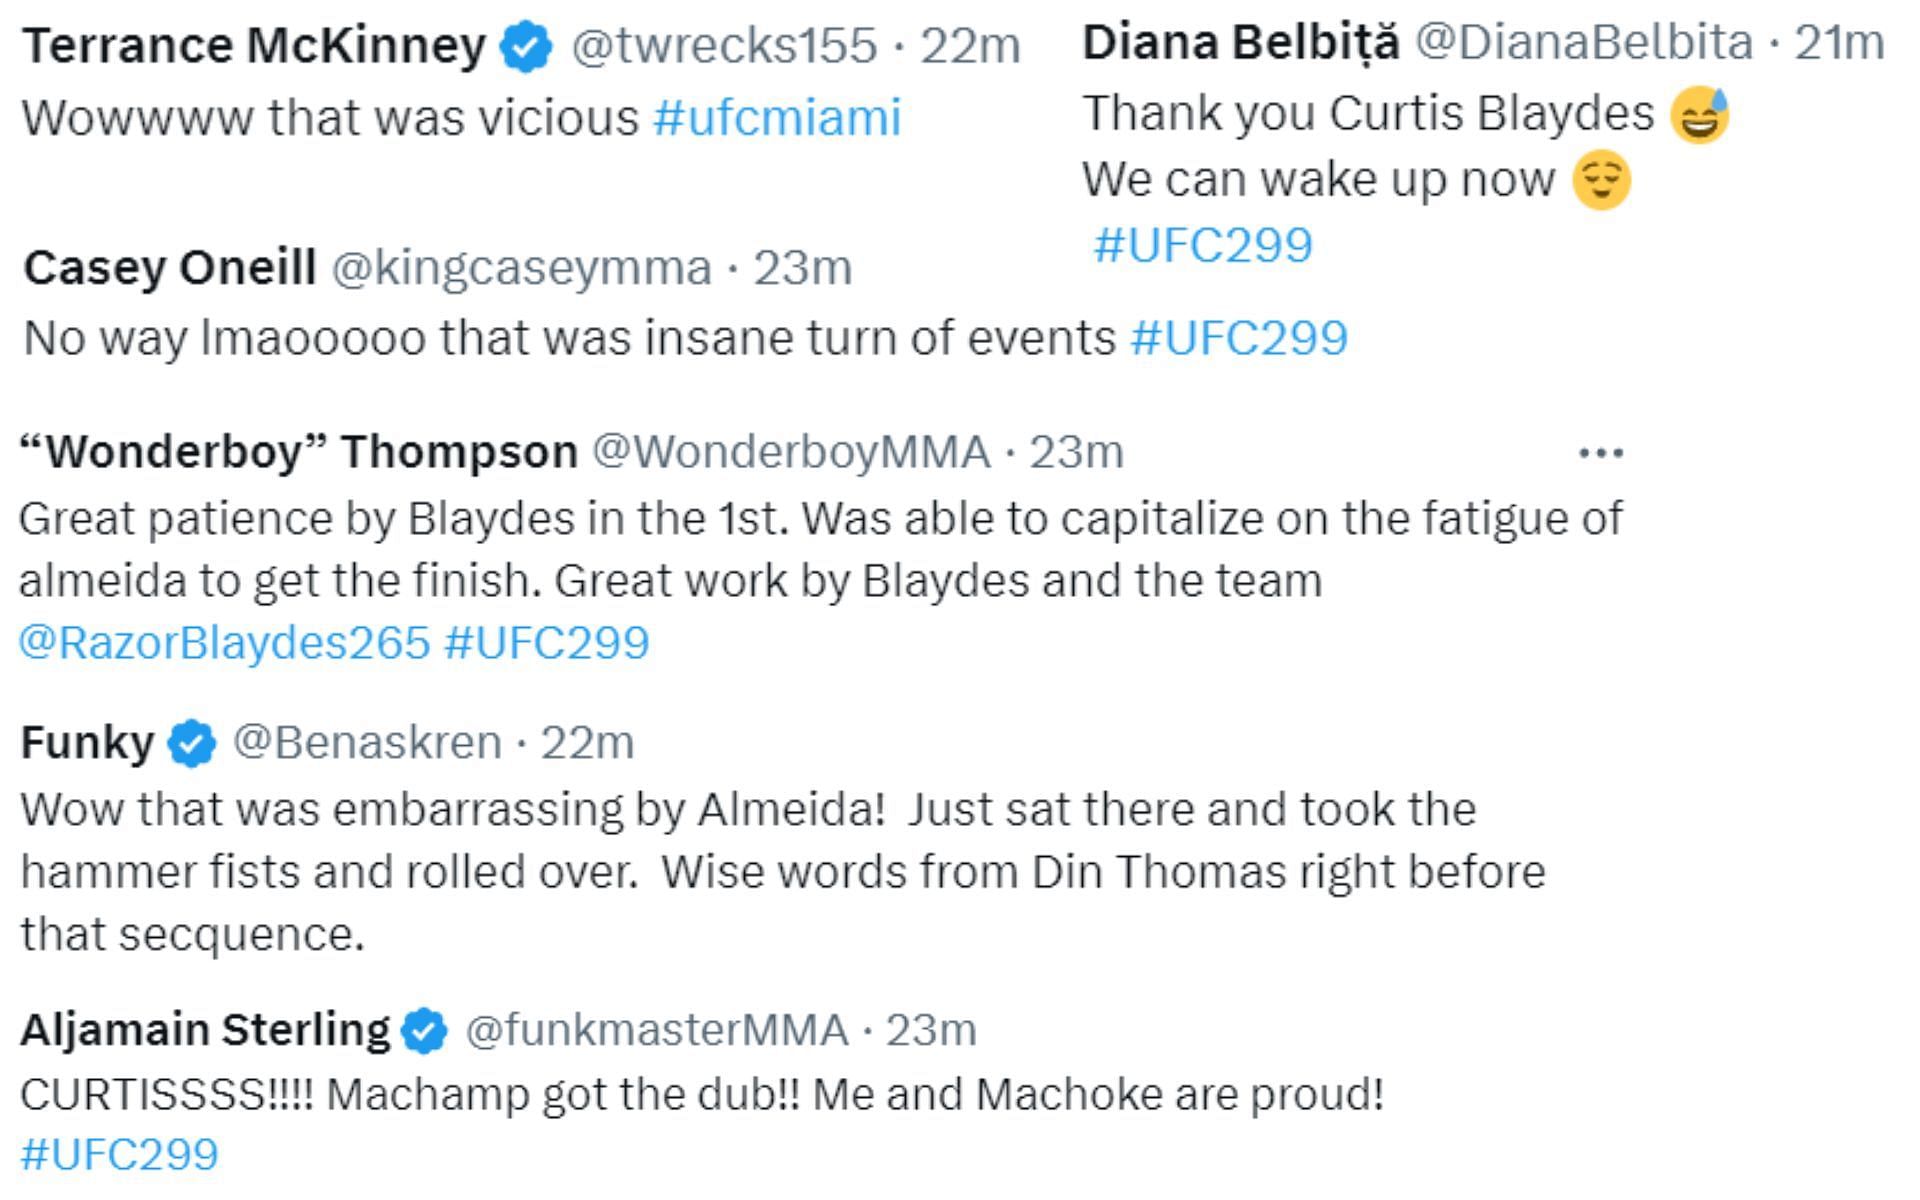 Fighters were impressed with Blaydes viciously knocking Almeida out